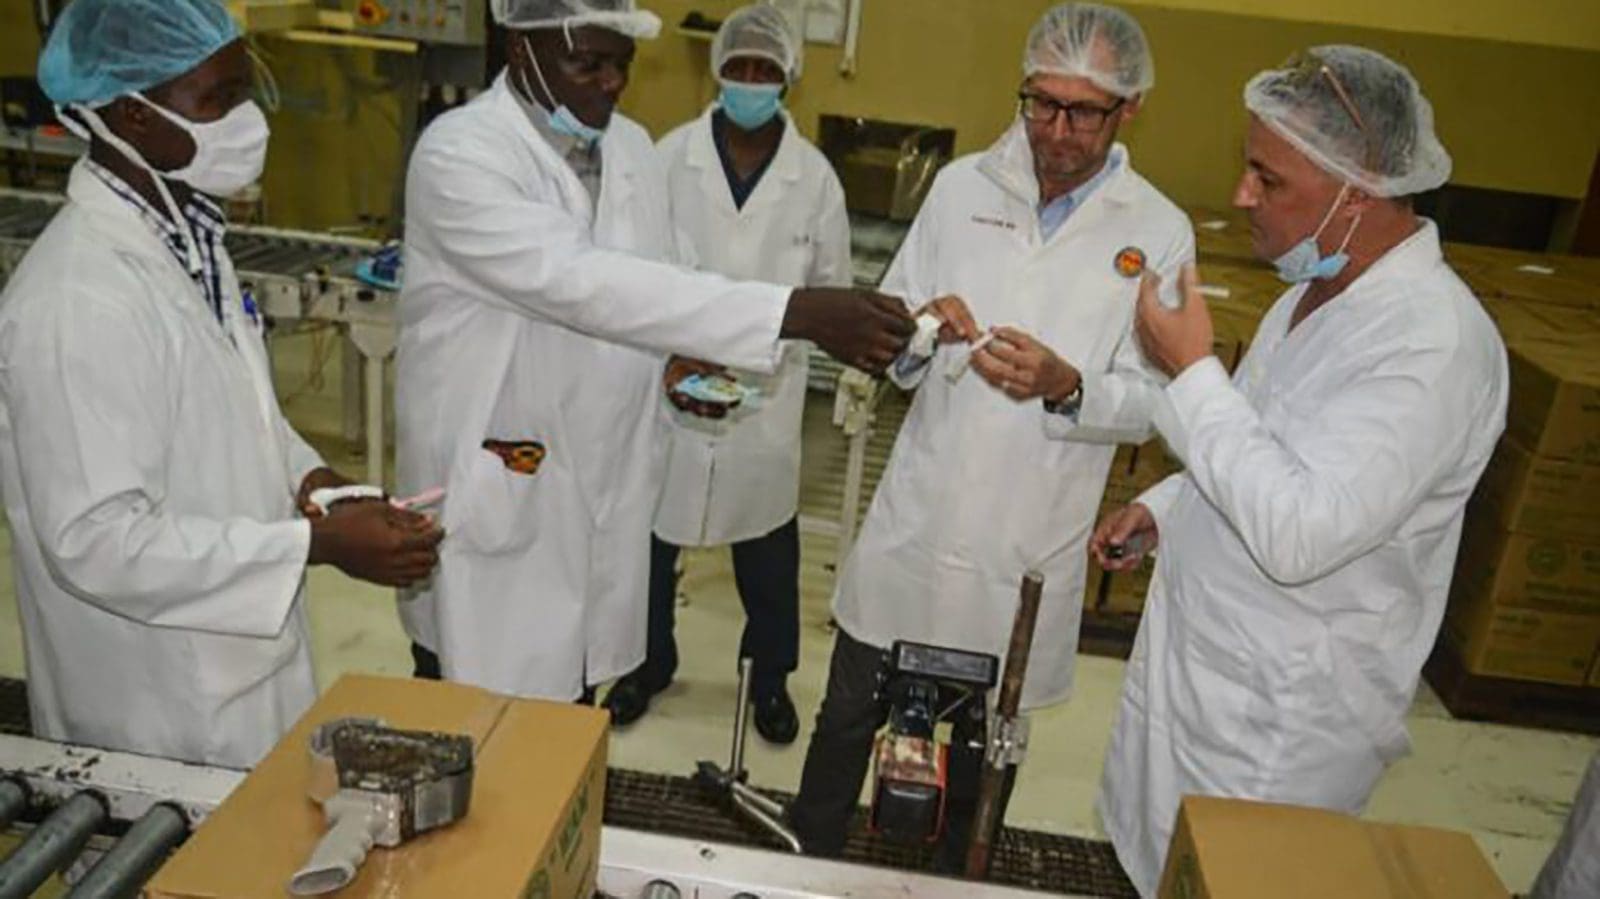 Ghana based West African Mills Company to invest US$5m in upgrading cocoa processing facilities